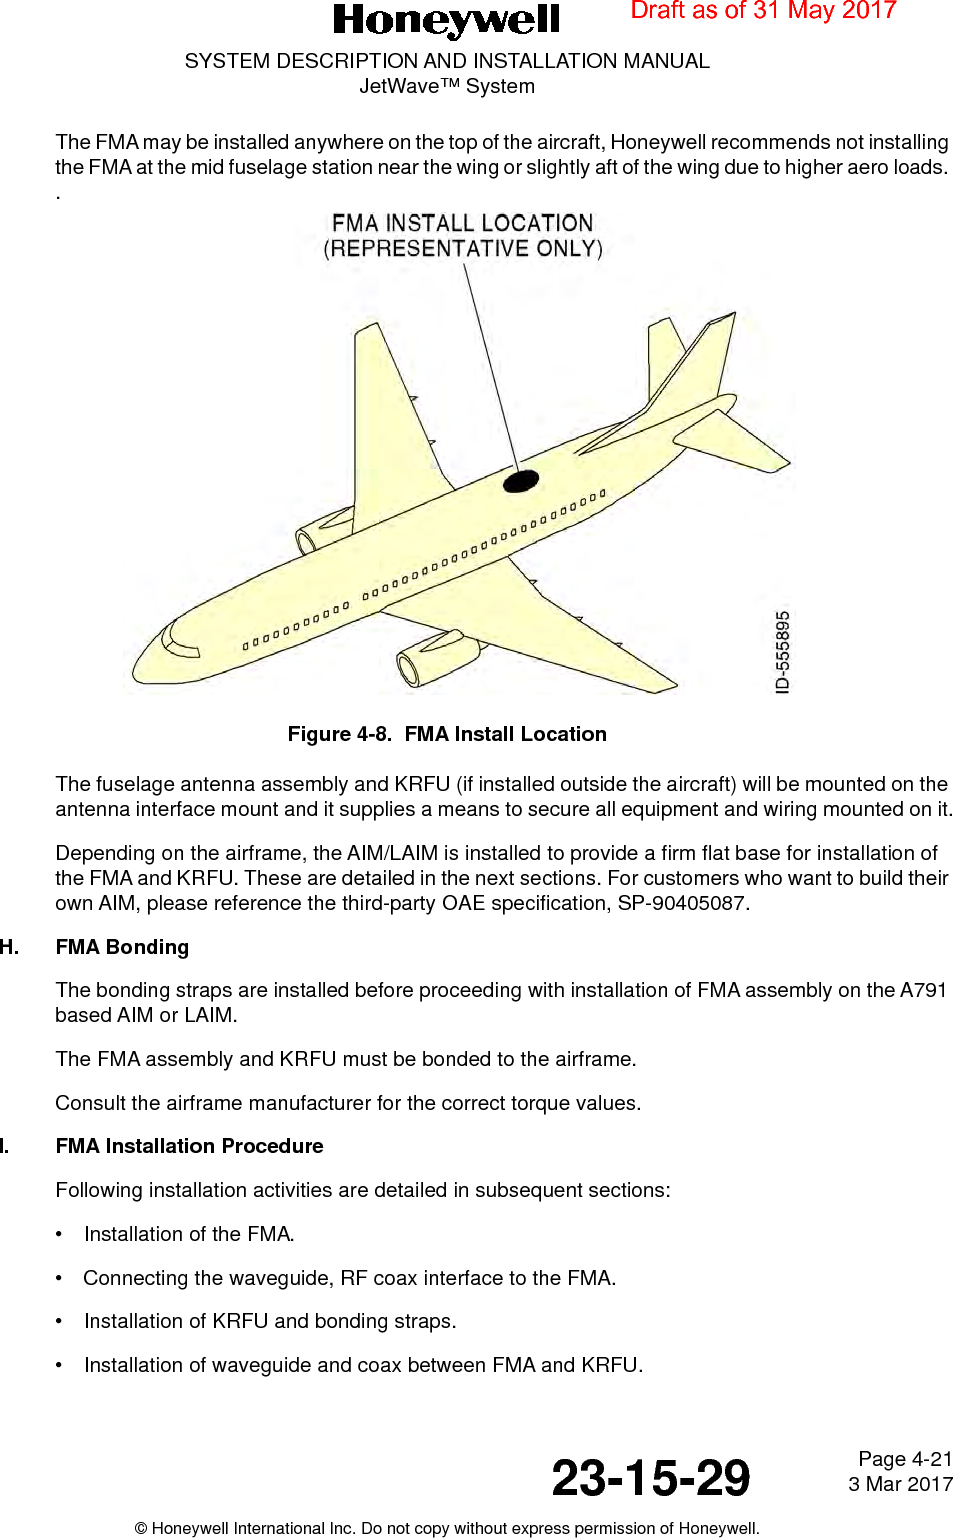 Page 4-21 3 Mar 201723-15-29SYSTEM DESCRIPTION AND INSTALLATION MANUALJetWave™ System© Honeywell International Inc. Do not copy without express permission of Honeywell.The FMA may be installed anywhere on the top of the aircraft, Honeywell recommends not installing the FMA at the mid fuselage station near the wing or slightly aft of the wing due to higher aero loads. .Figure 4-8.  FMA Install LocationThe fuselage antenna assembly and KRFU (if installed outside the aircraft) will be mounted on the antenna interface mount and it supplies a means to secure all equipment and wiring mounted on it.Depending on the airframe, the AIM/LAIM is installed to provide a firm flat base for installation of the FMA and KRFU. These are detailed in the next sections. For customers who want to build their own AIM, please reference the third-party OAE specification, SP-90405087. H. FMA BondingThe bonding straps are installed before proceeding with installation of FMA assembly on the A791 based AIM or LAIM. The FMA assembly and KRFU must be bonded to the airframe. Consult the airframe manufacturer for the correct torque values. I. FMA Installation ProcedureFollowing installation activities are detailed in subsequent sections: • Installation of the FMA.• Connecting the waveguide, RF coax interface to the FMA. • Installation of KRFU and bonding straps. • Installation of waveguide and coax between FMA and KRFU. Draft as of 31 May 2017